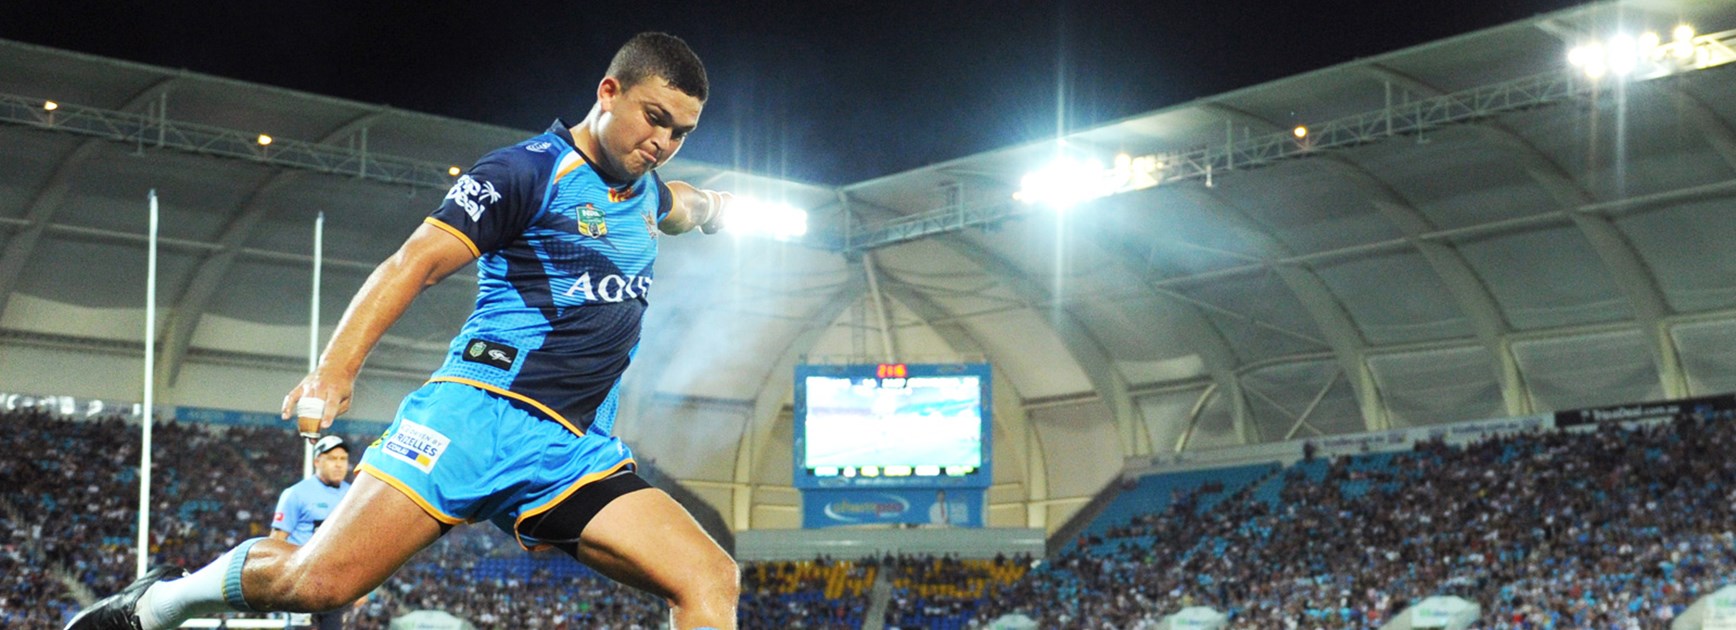 Star halfback Ashley Taylor has committed his future to the Gold Coast Titans.